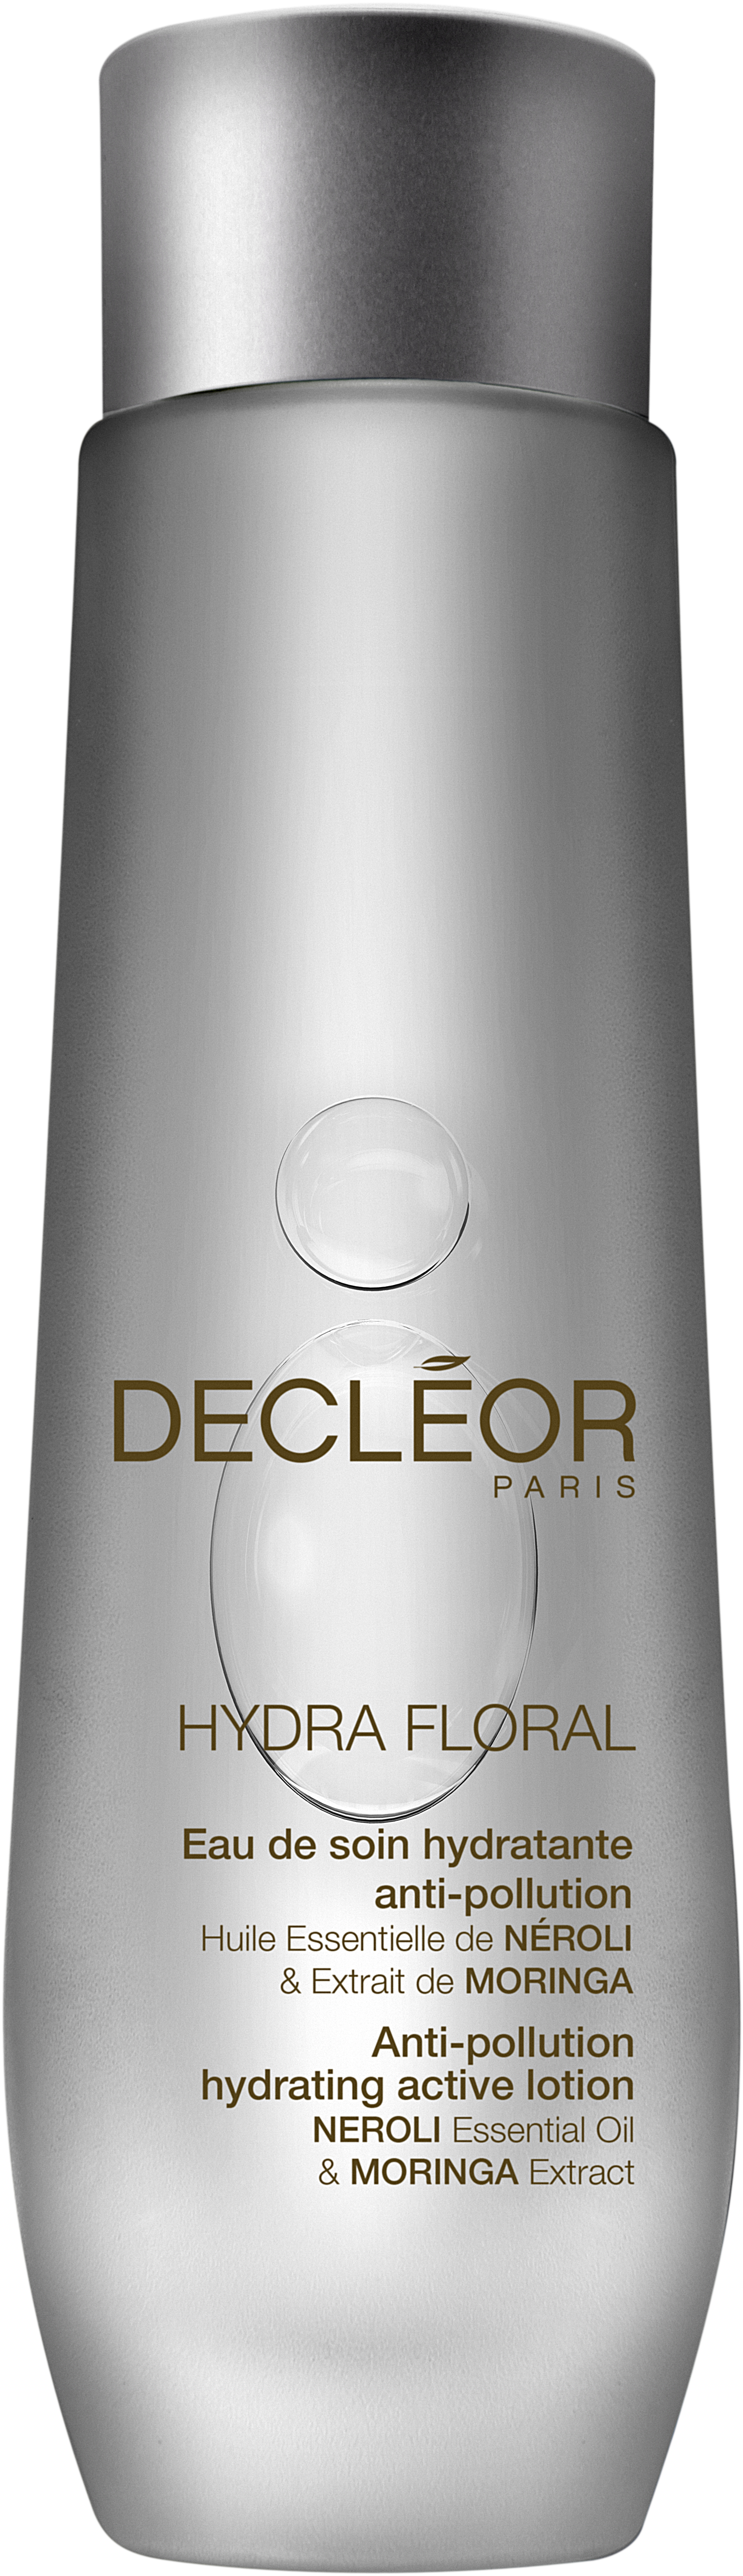 Decleor Anti-Pollution Hydrating Active Lotion 100ml